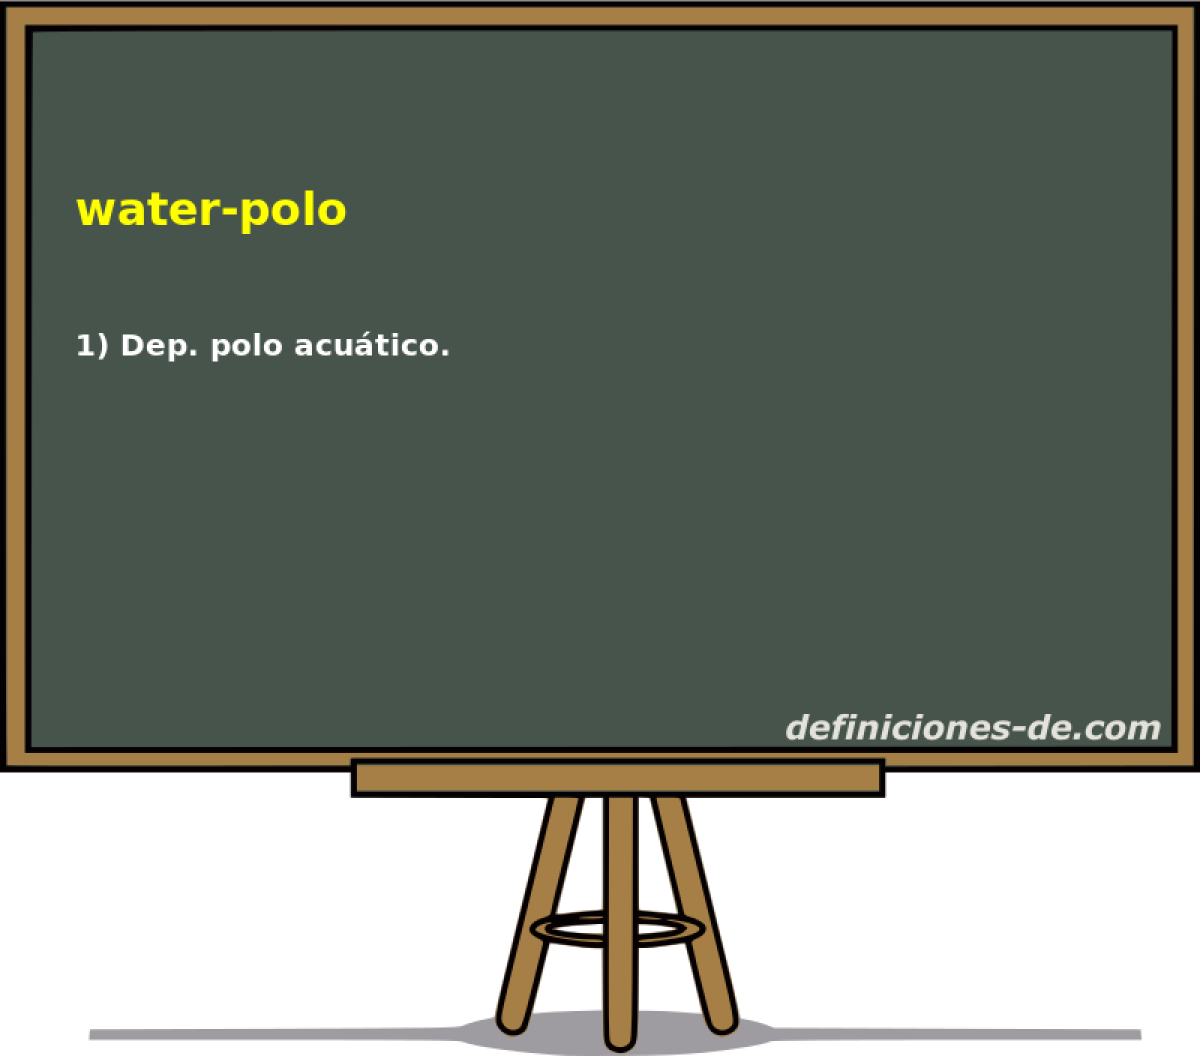 water-polo 